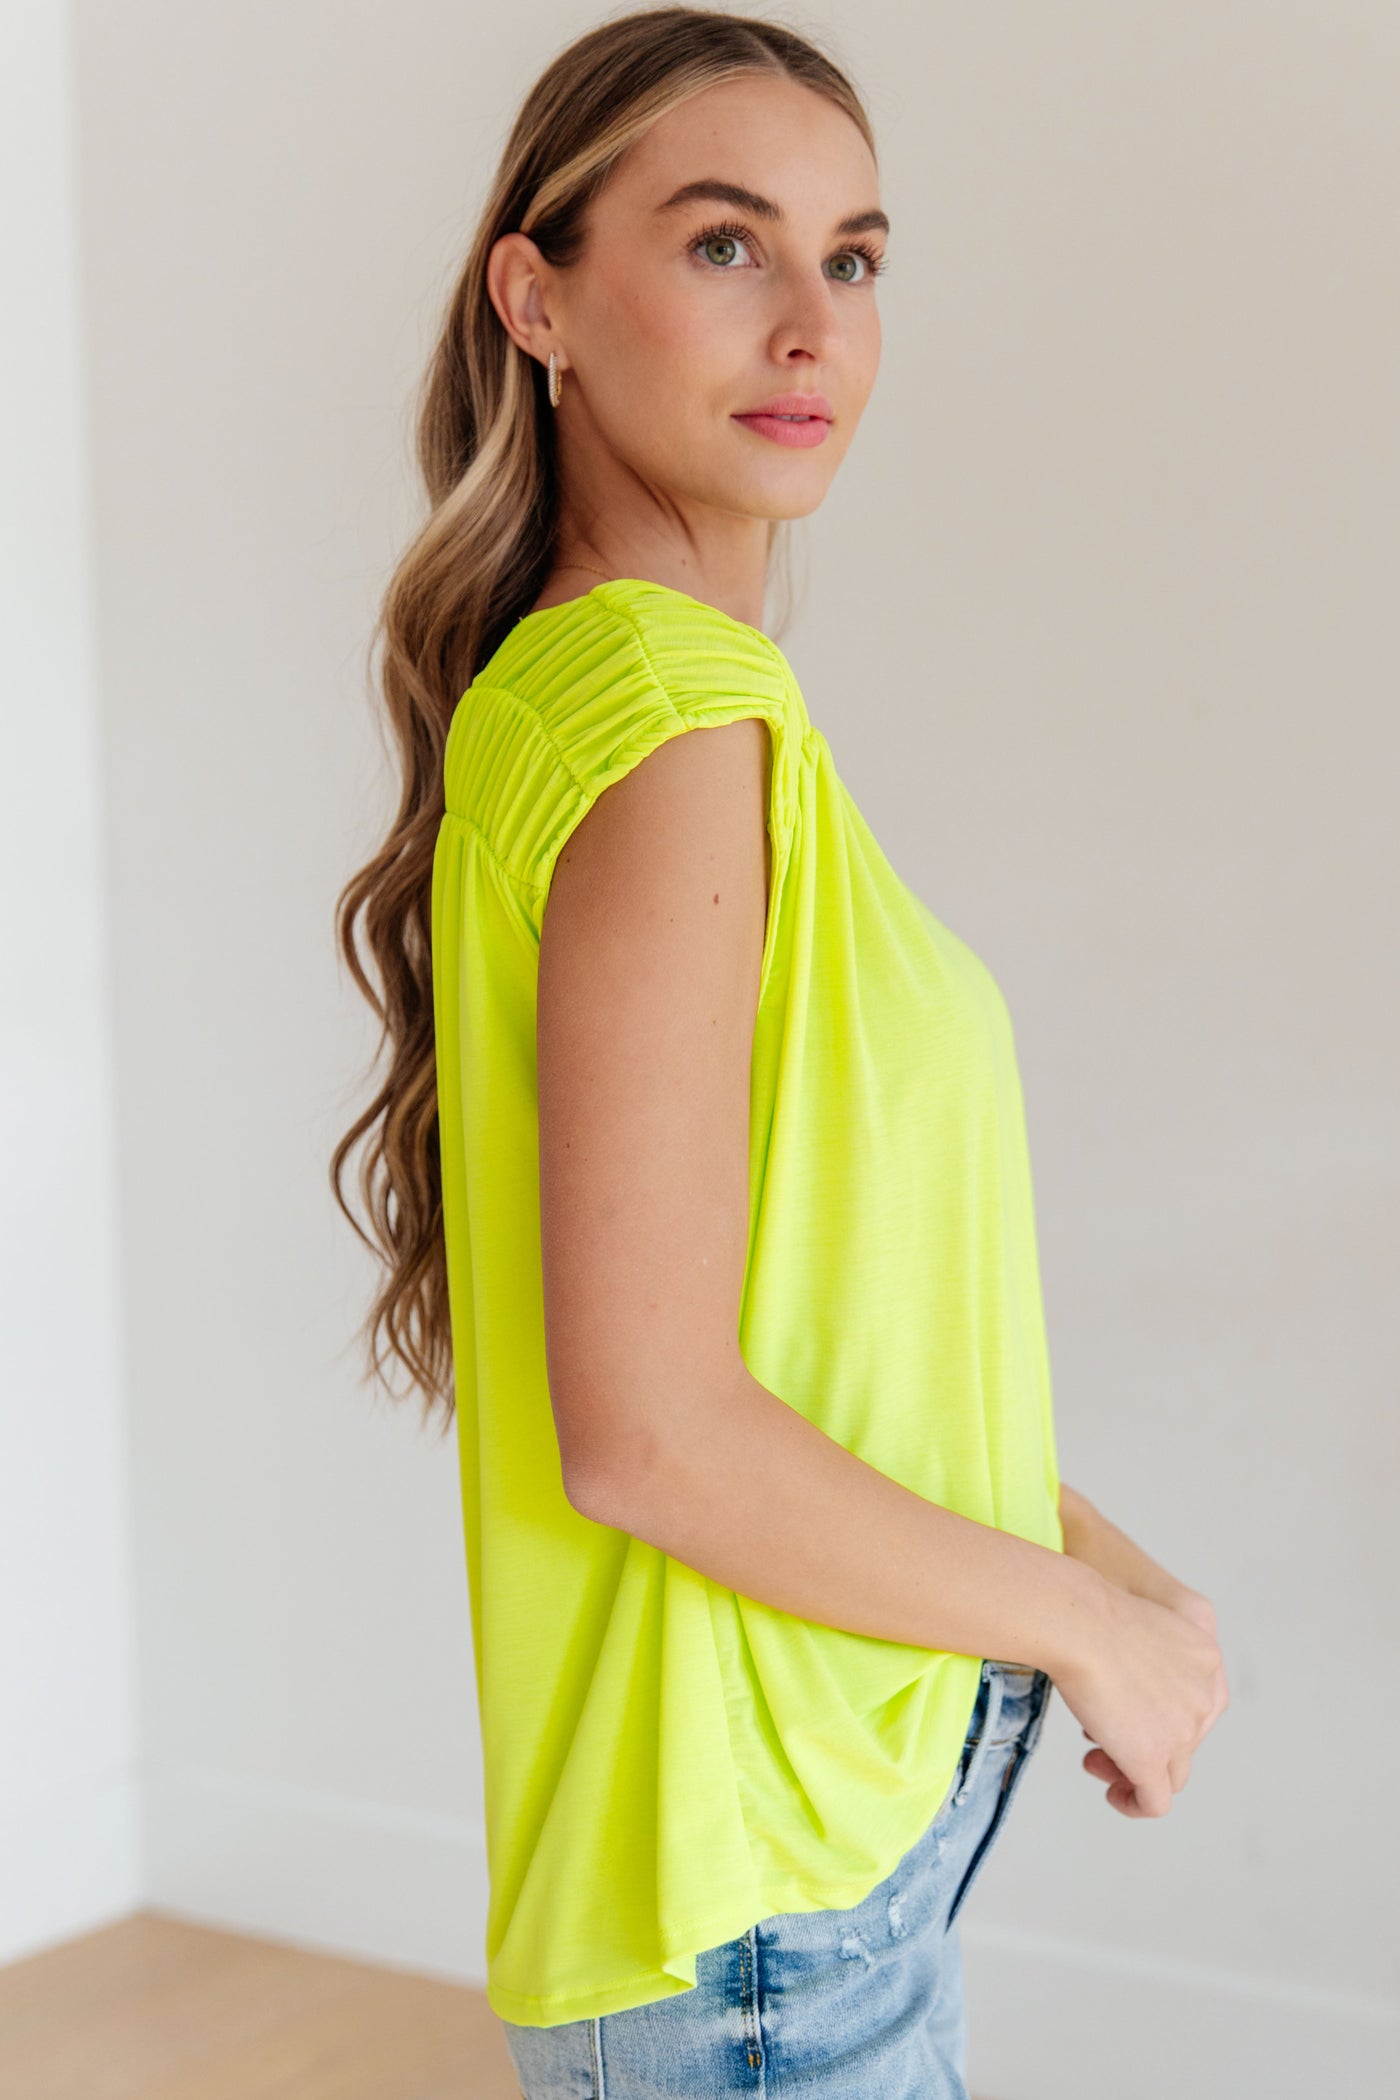 Ruched Cap Sleeve Top in Neon Green-Womens-Ave Shops-Market Street Nest, Fashionable Clothing, Shoes and Home Décor Located in Mabank, TX